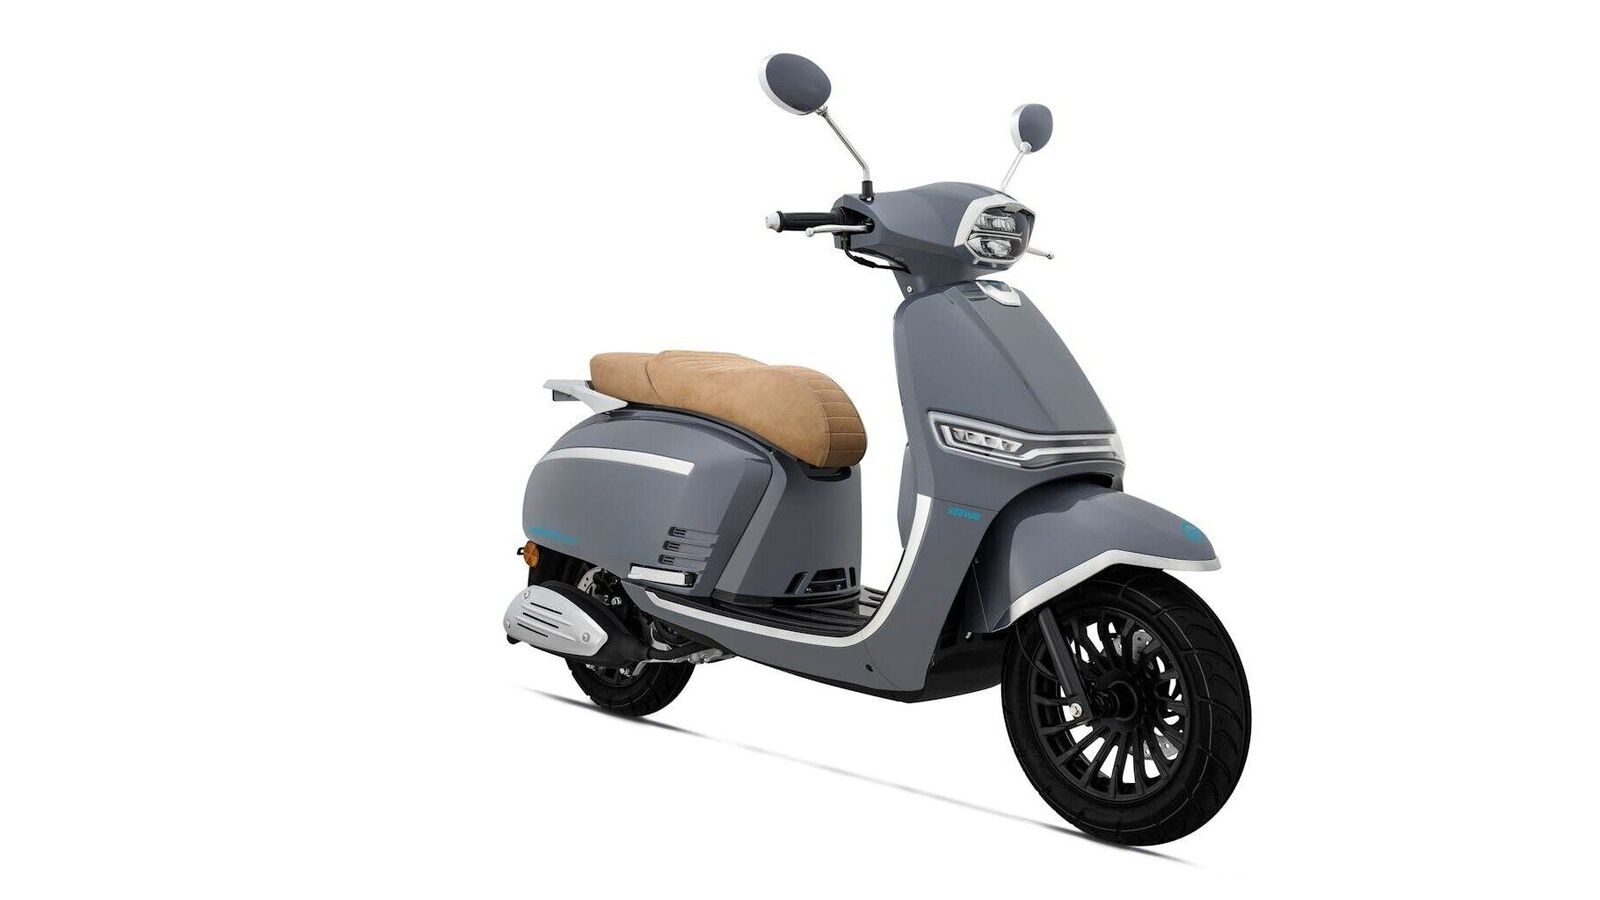 Keeway introduces Iskia 125 retro-styled scooter Europe, rival Vespa 125 | Auto